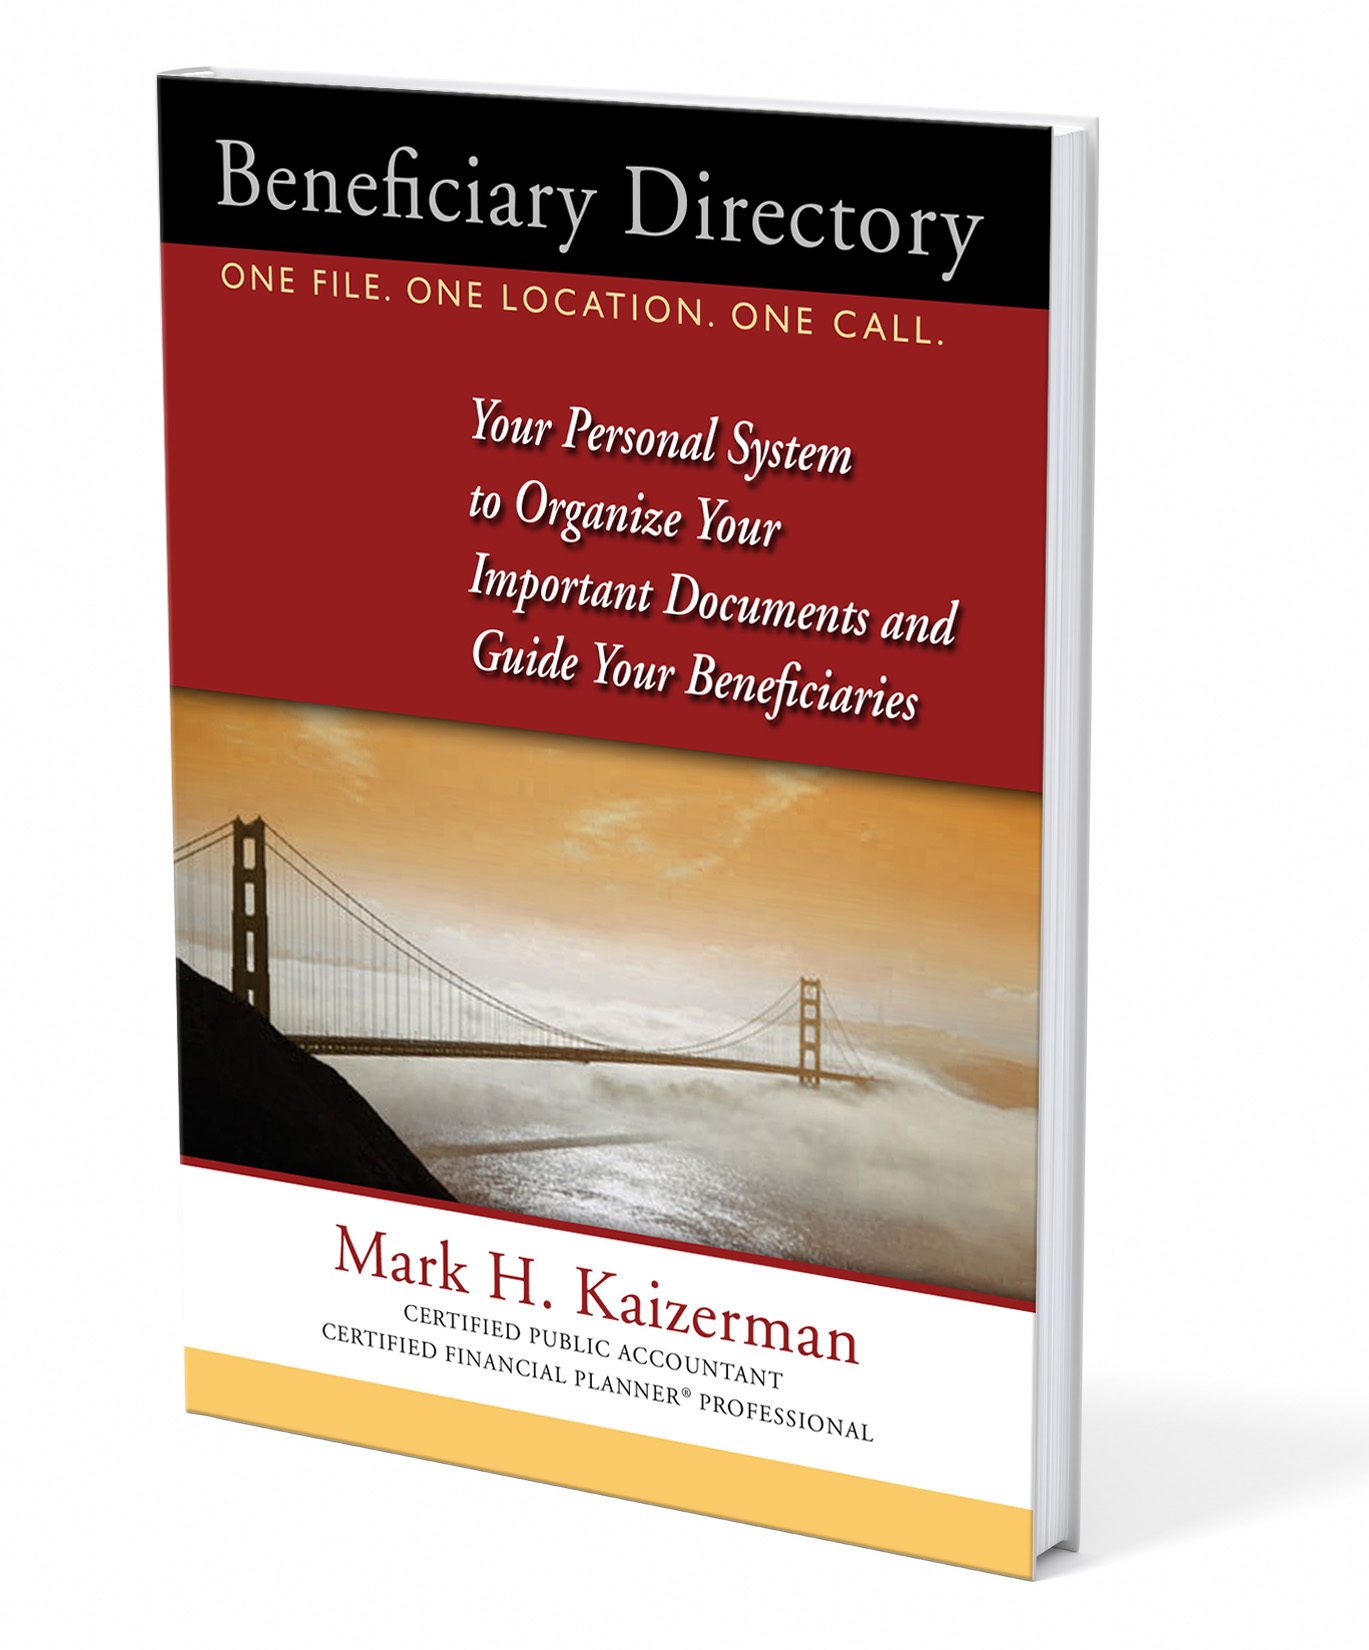 the Beneficiary Directory book